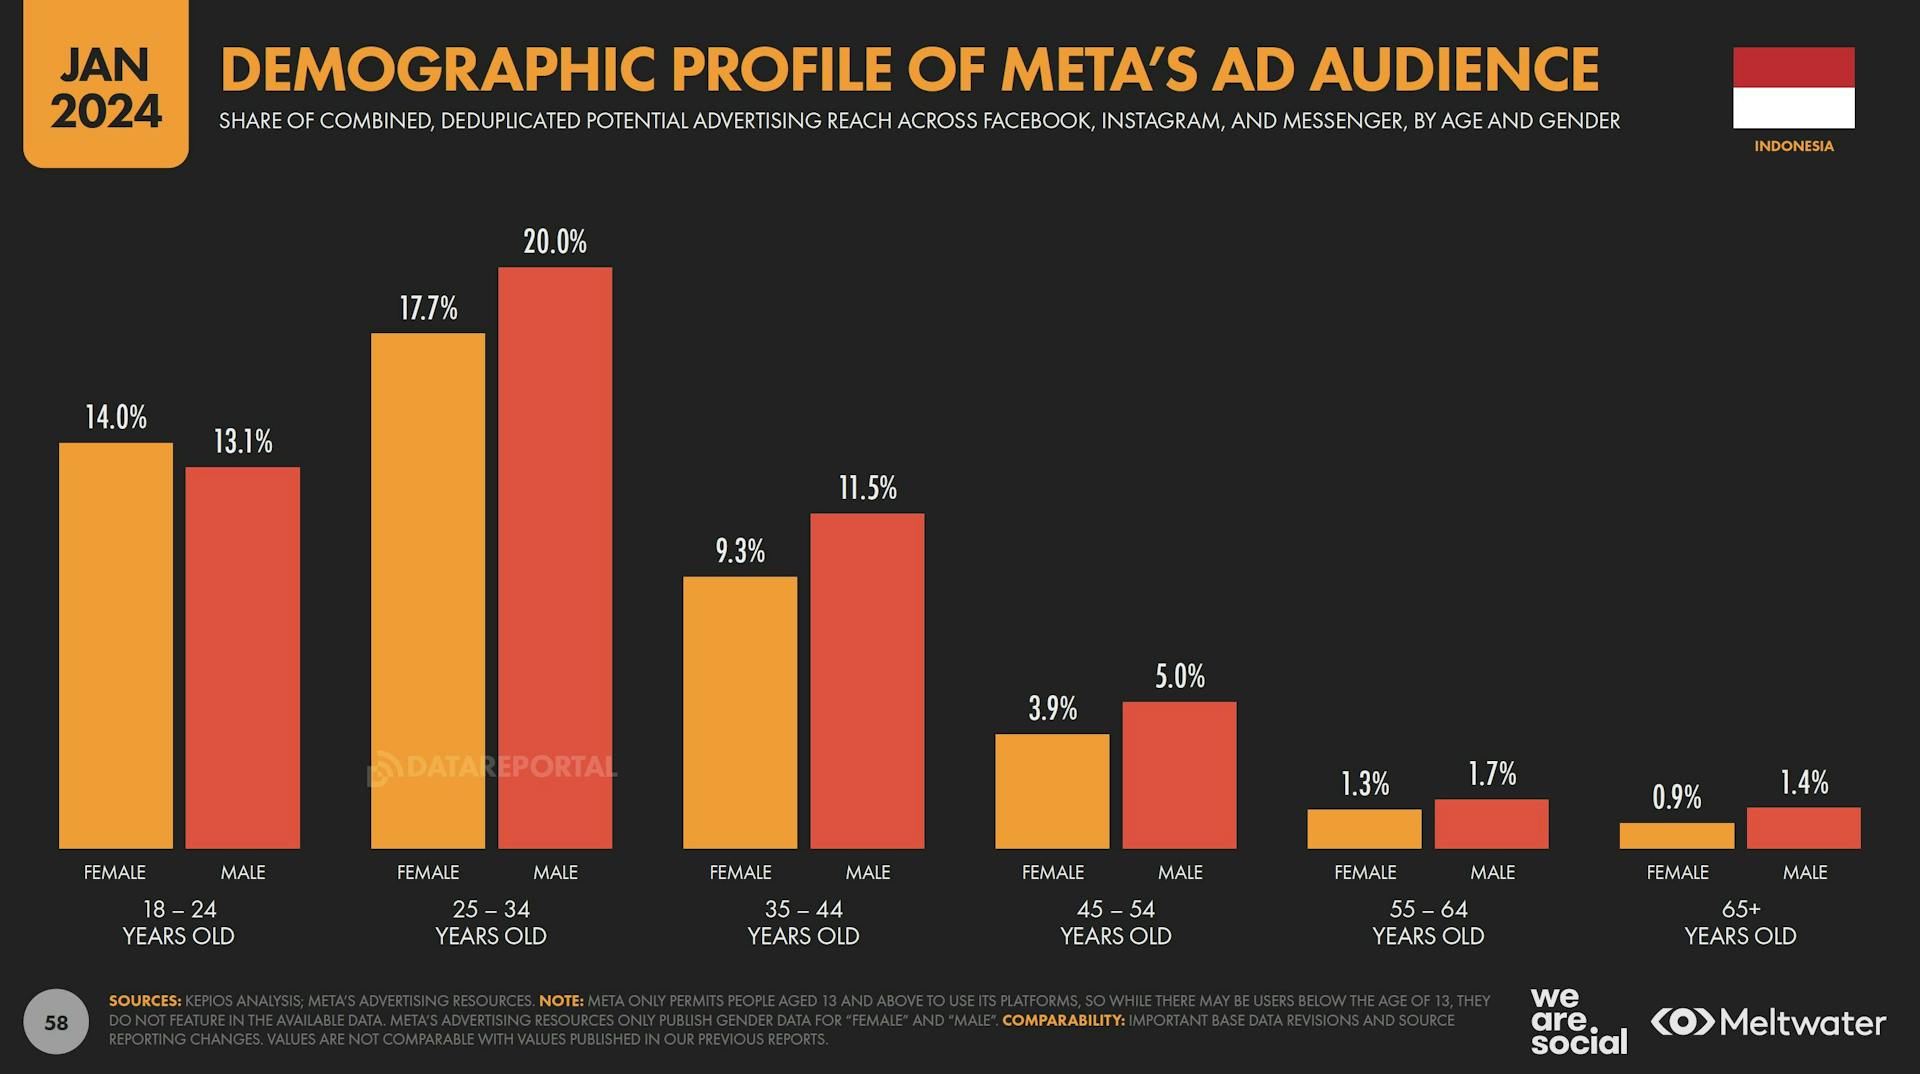 Demographic profile of Meta's ad audience based on Global Digital Report 2024 for Indonesia